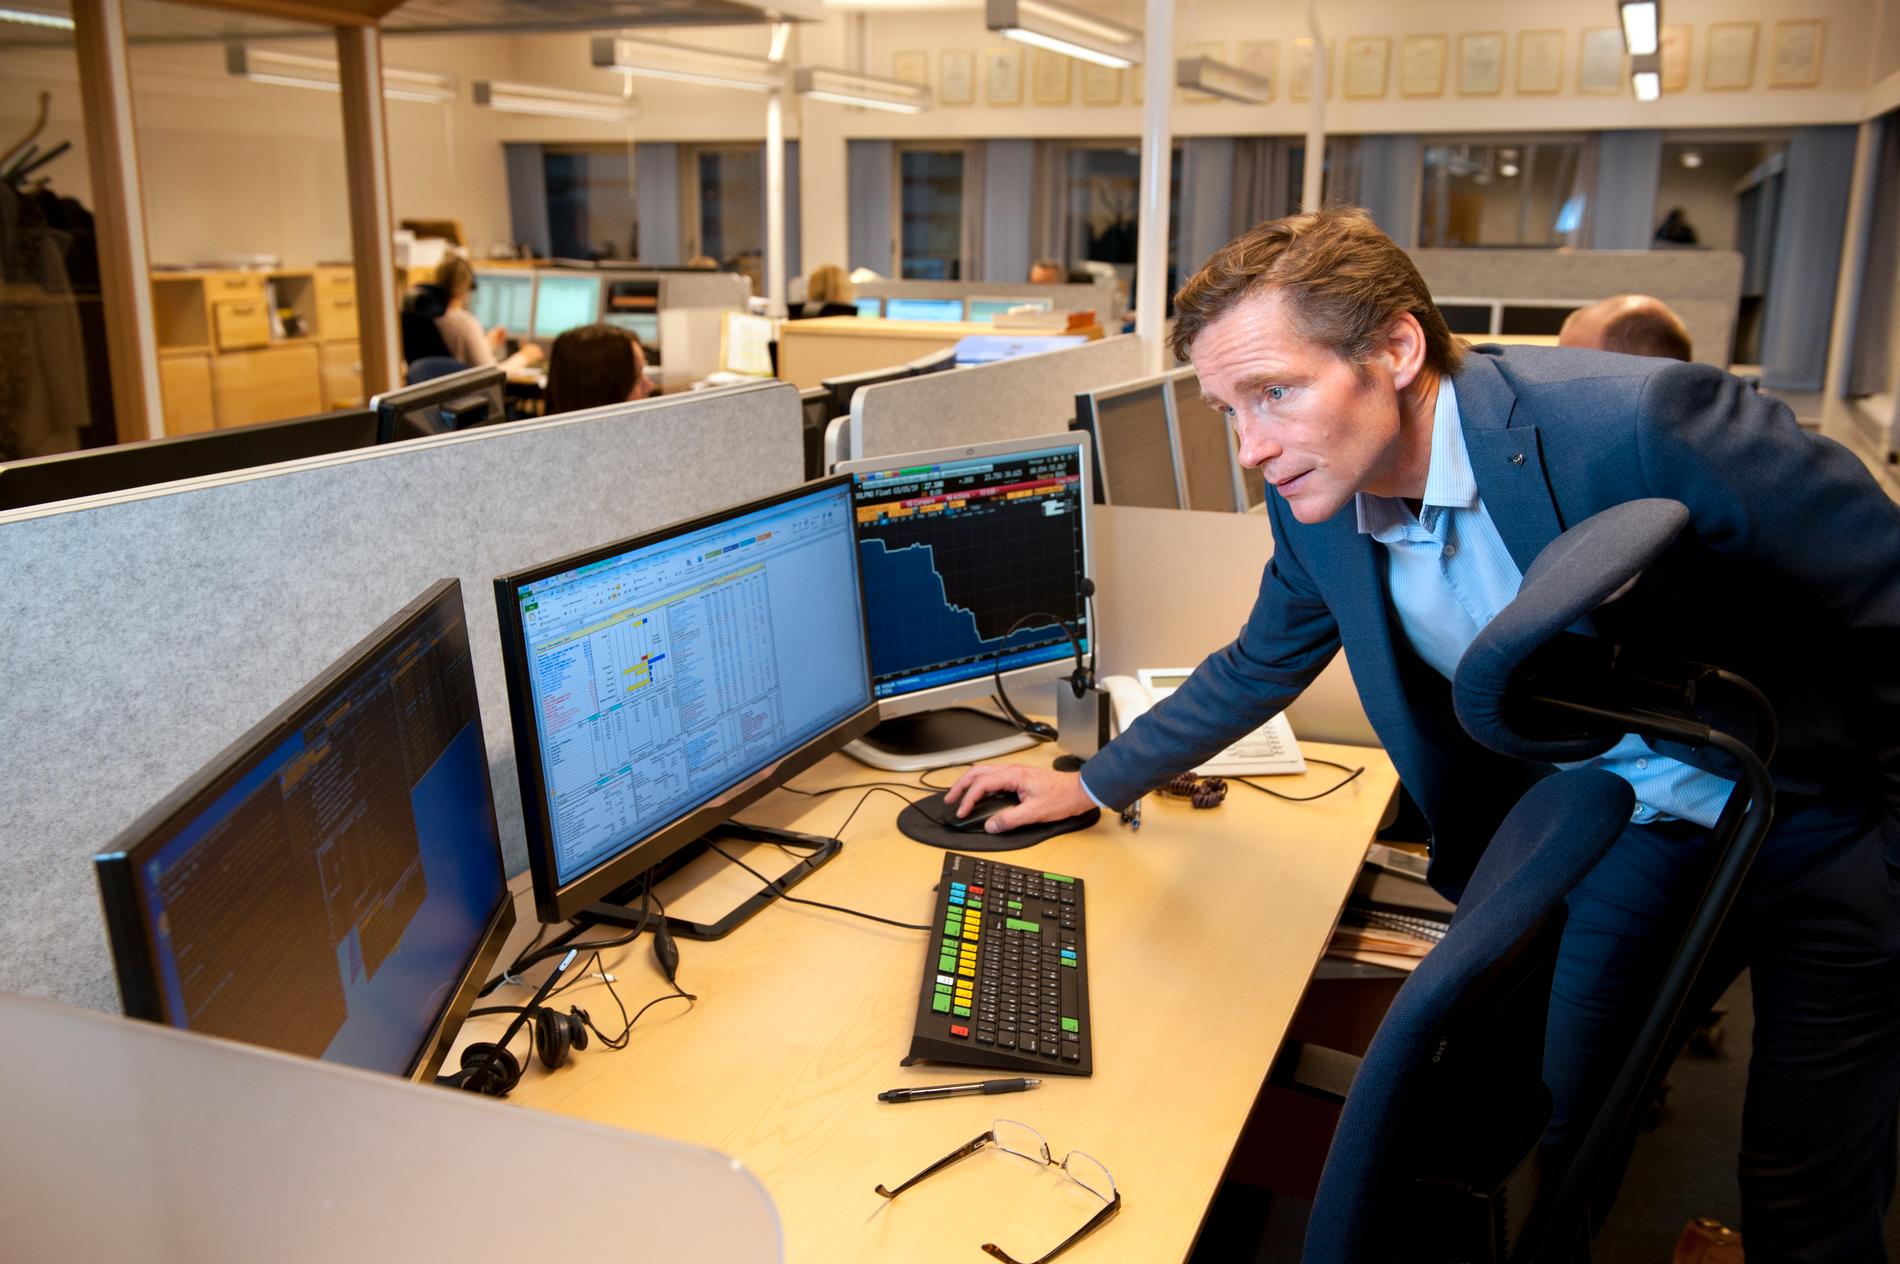 HOW WE USUALLY SEE HIM: Robert Næss Investment Director at Nordea. 